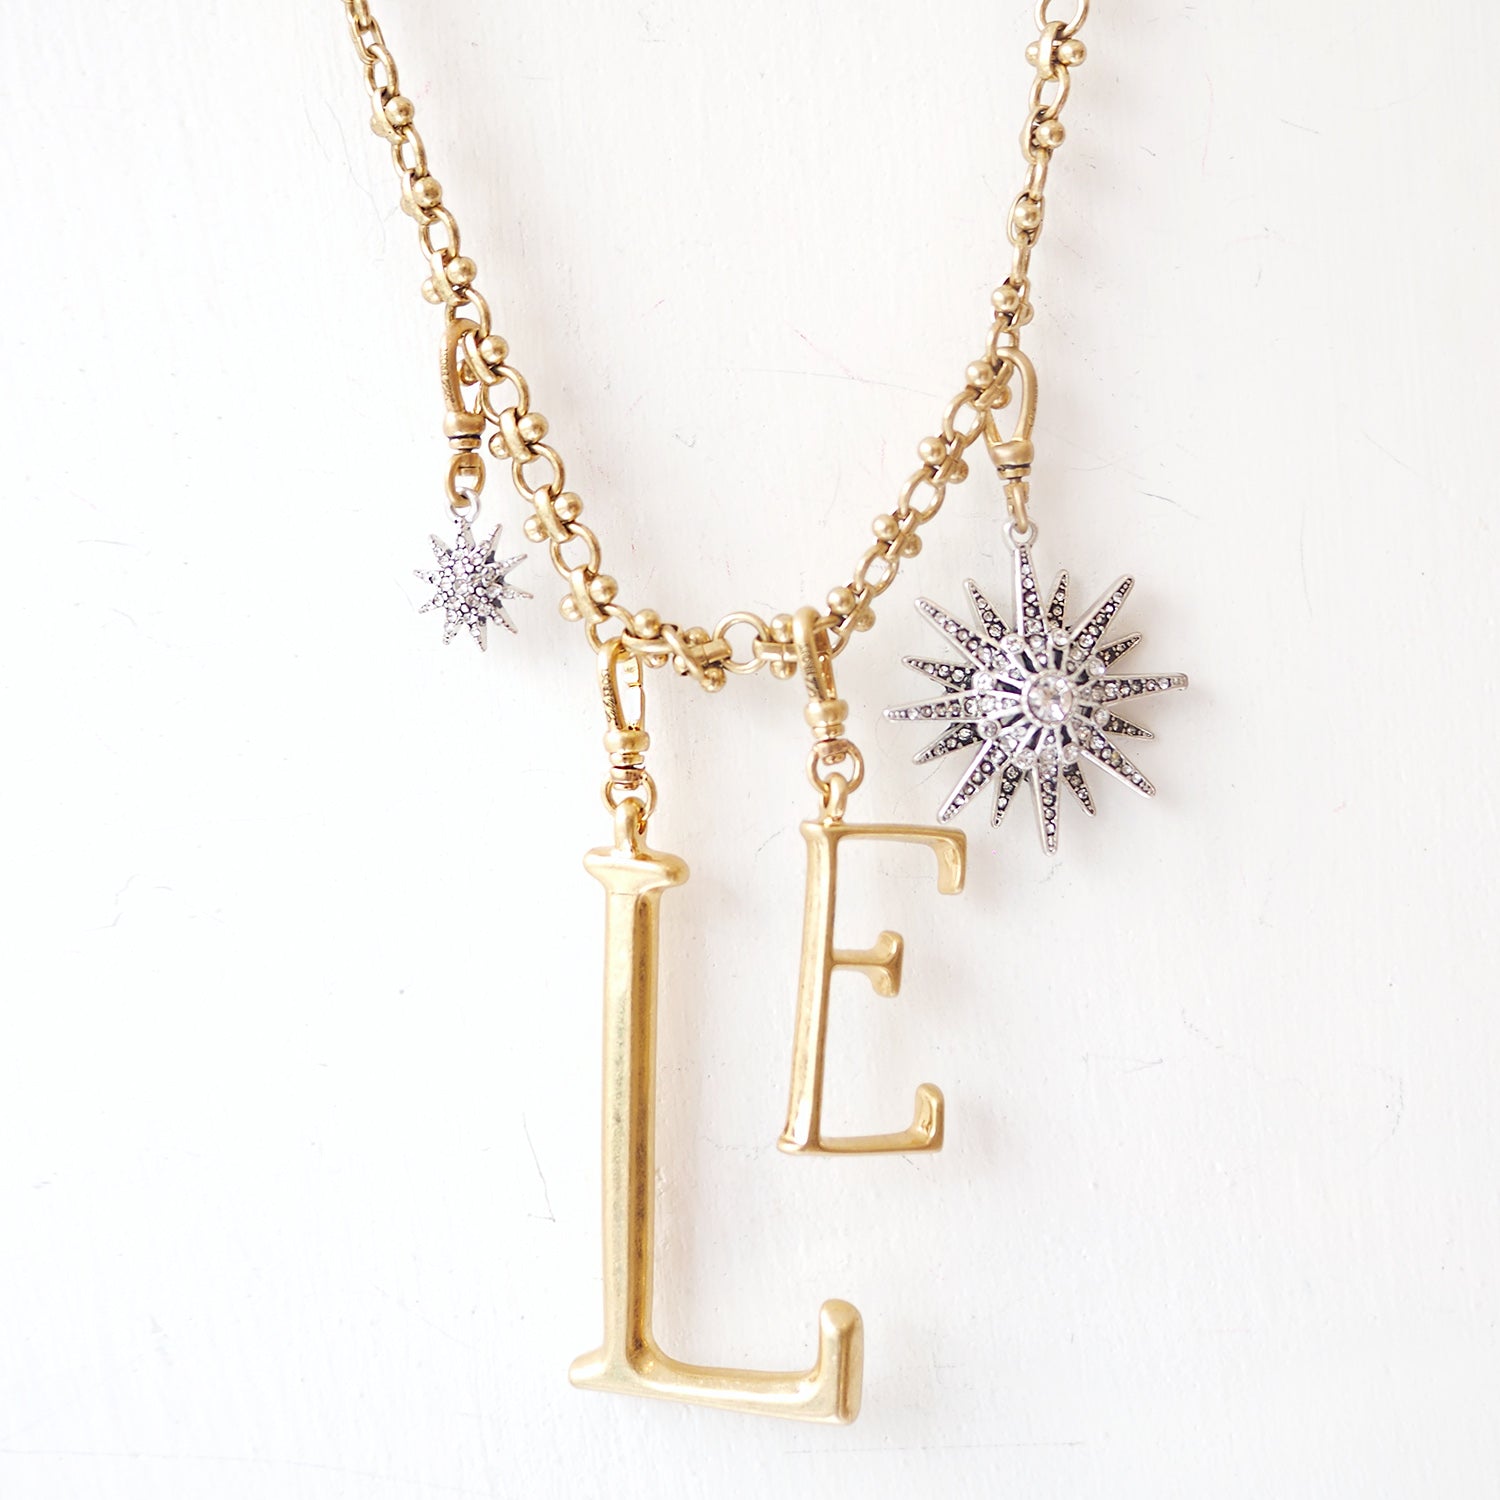 The Lulu Frost Electra Star is named for a cluster of stars far out in the Universe. The petite star charm features an array of sparkling crystal. Pair with one of the chain bases and mix with other charms to create your own look. 